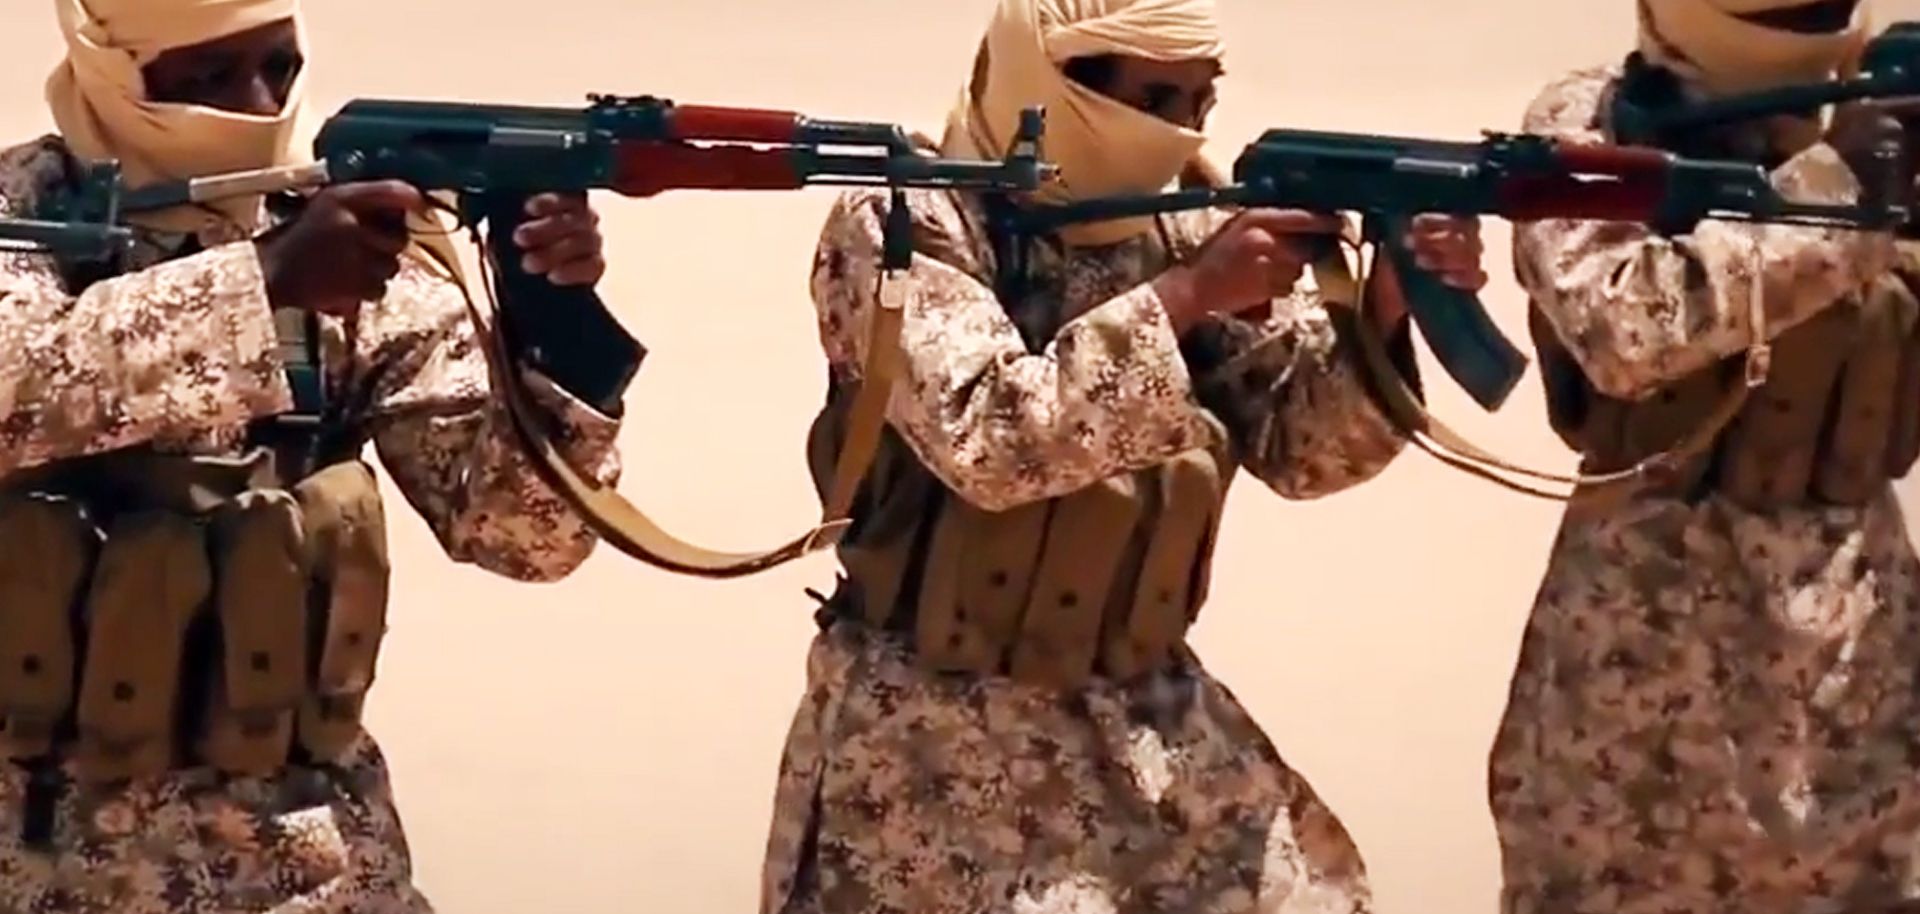 Wilayat Sanaa training video depicts well-trained militants.